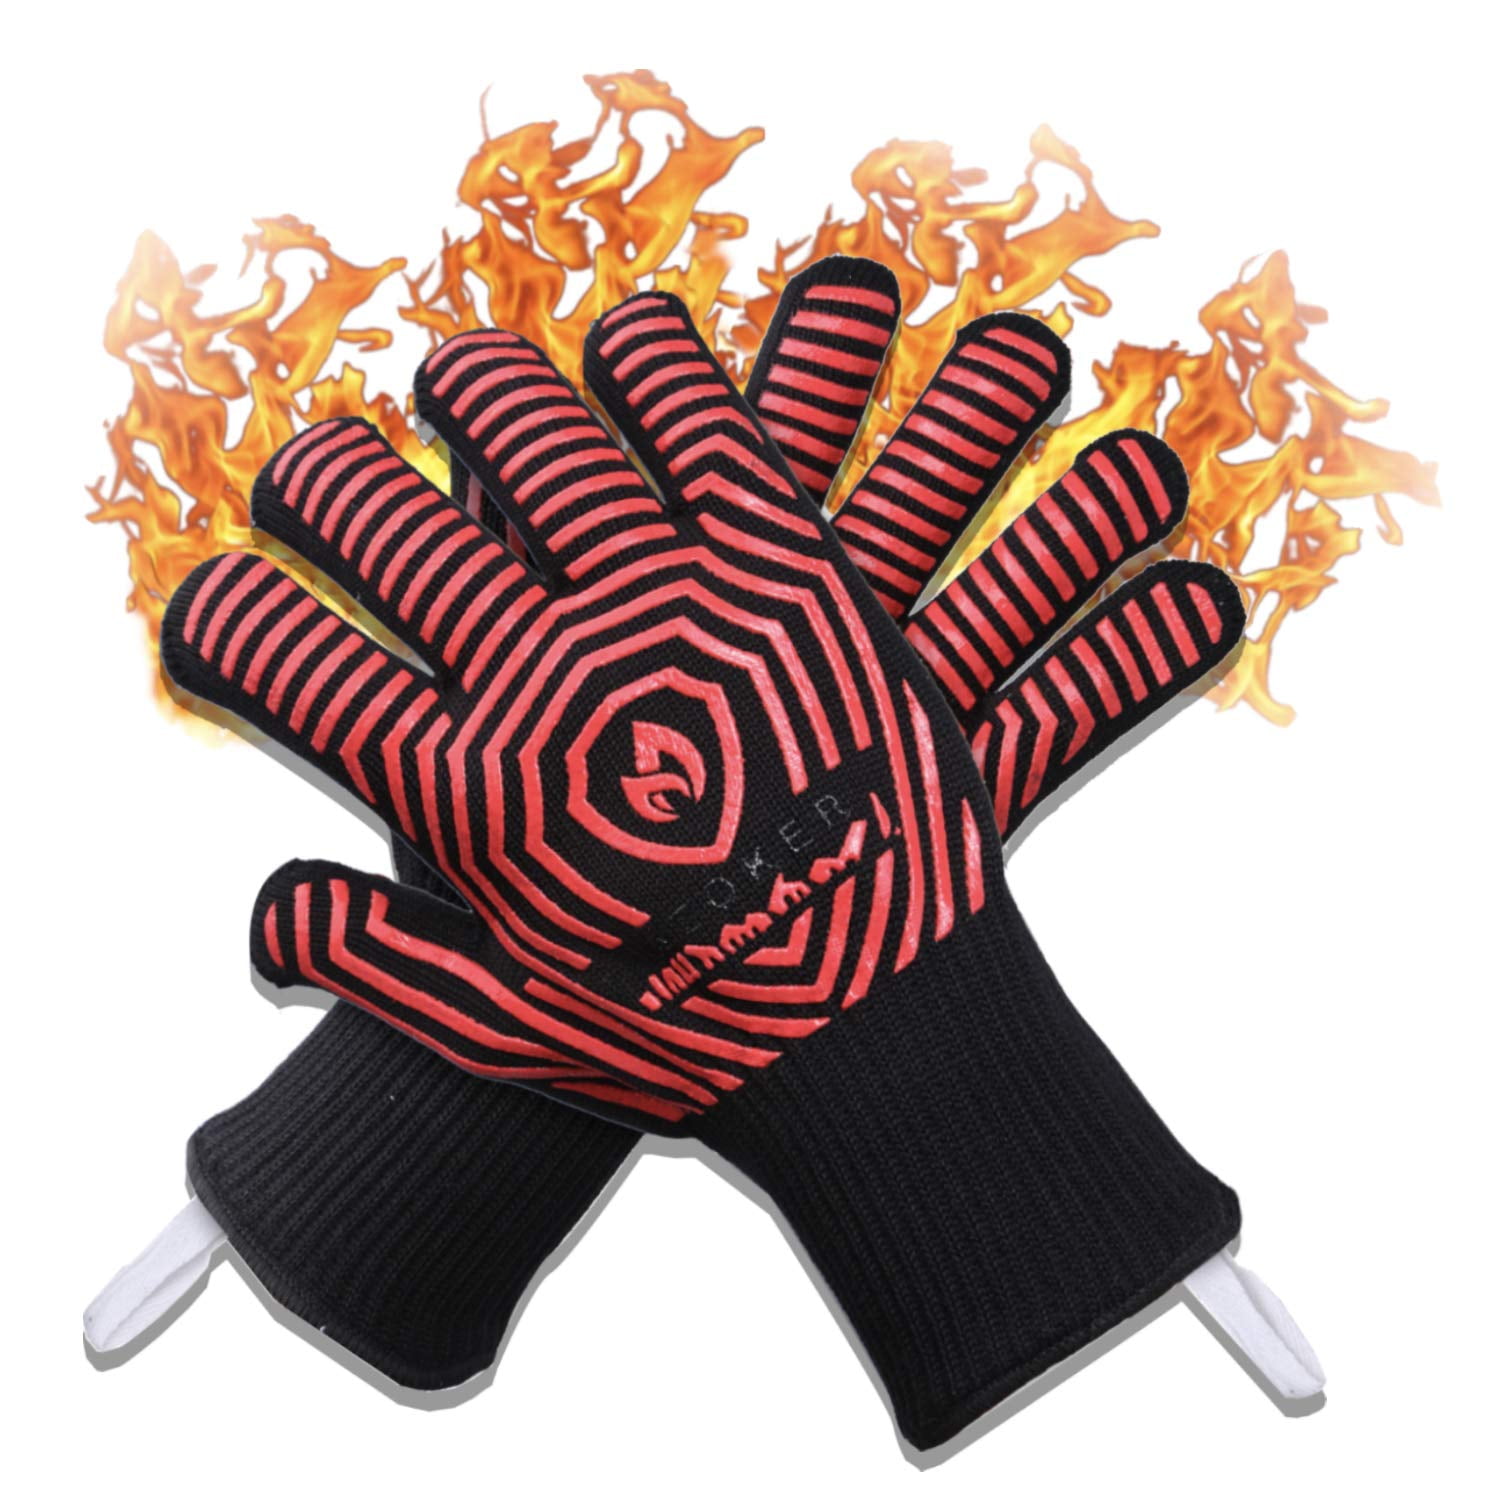 932°F Silicone Extreme Heat Resistant Proof Cooking Oven Mitt BBQ Grilling Glove 